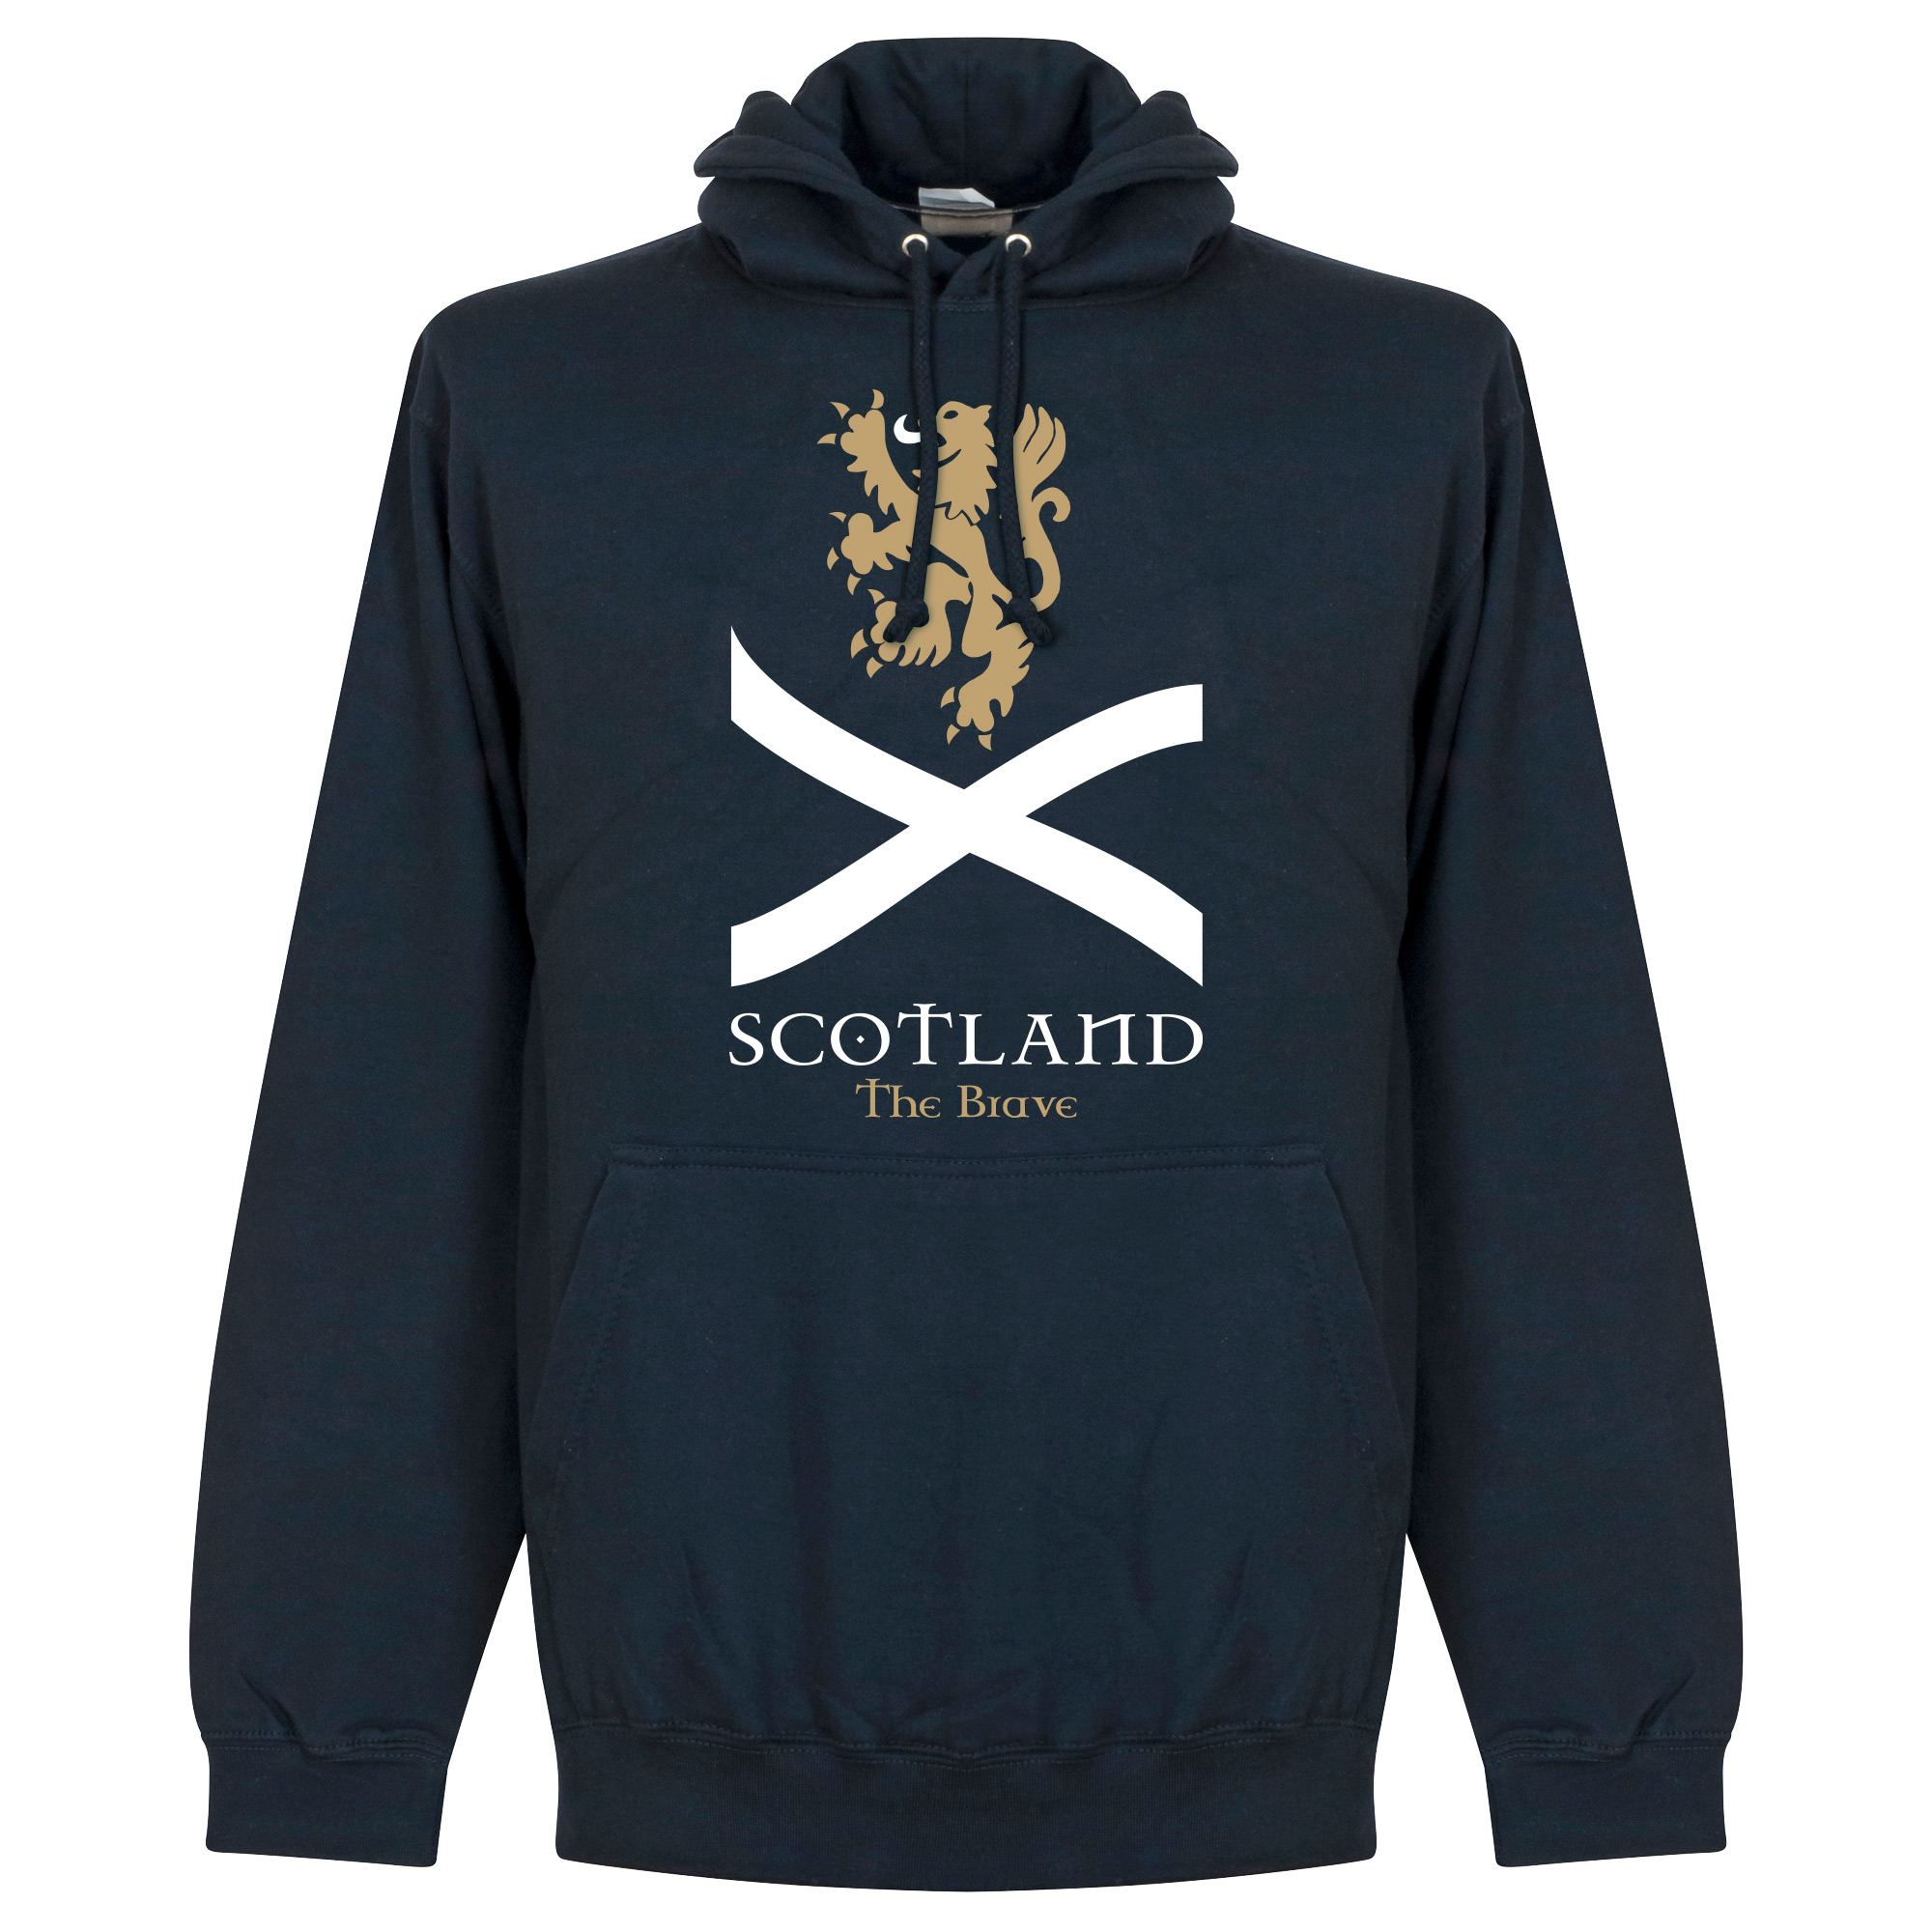 Scotland The Brave Hooded Sweater L